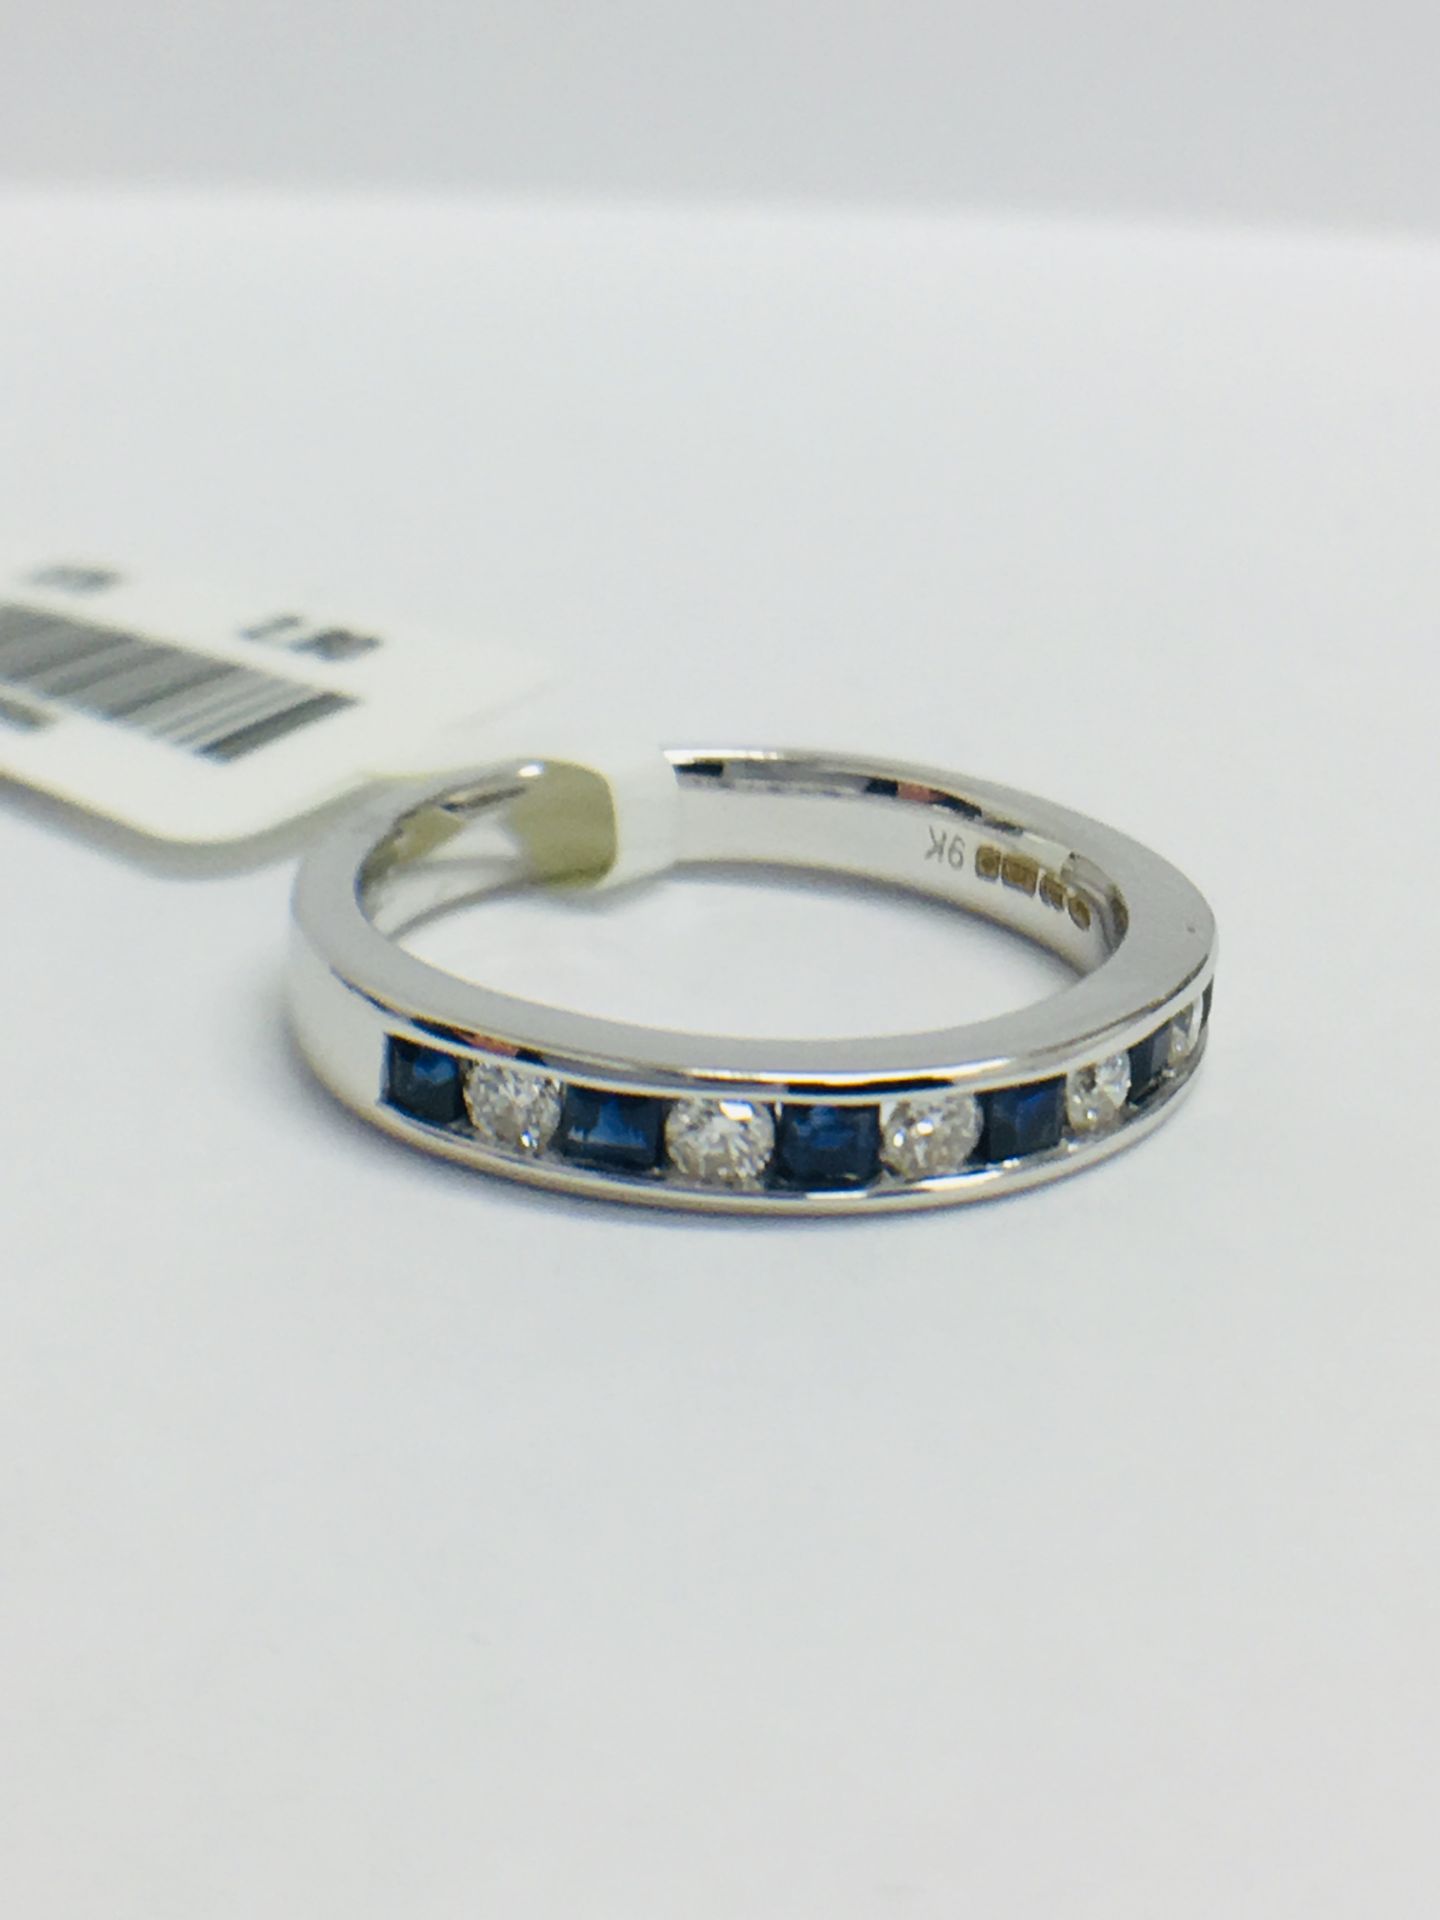 9ct White Gold Sapphire Diamond Channel Set Eternity Ring - Image 11 of 13